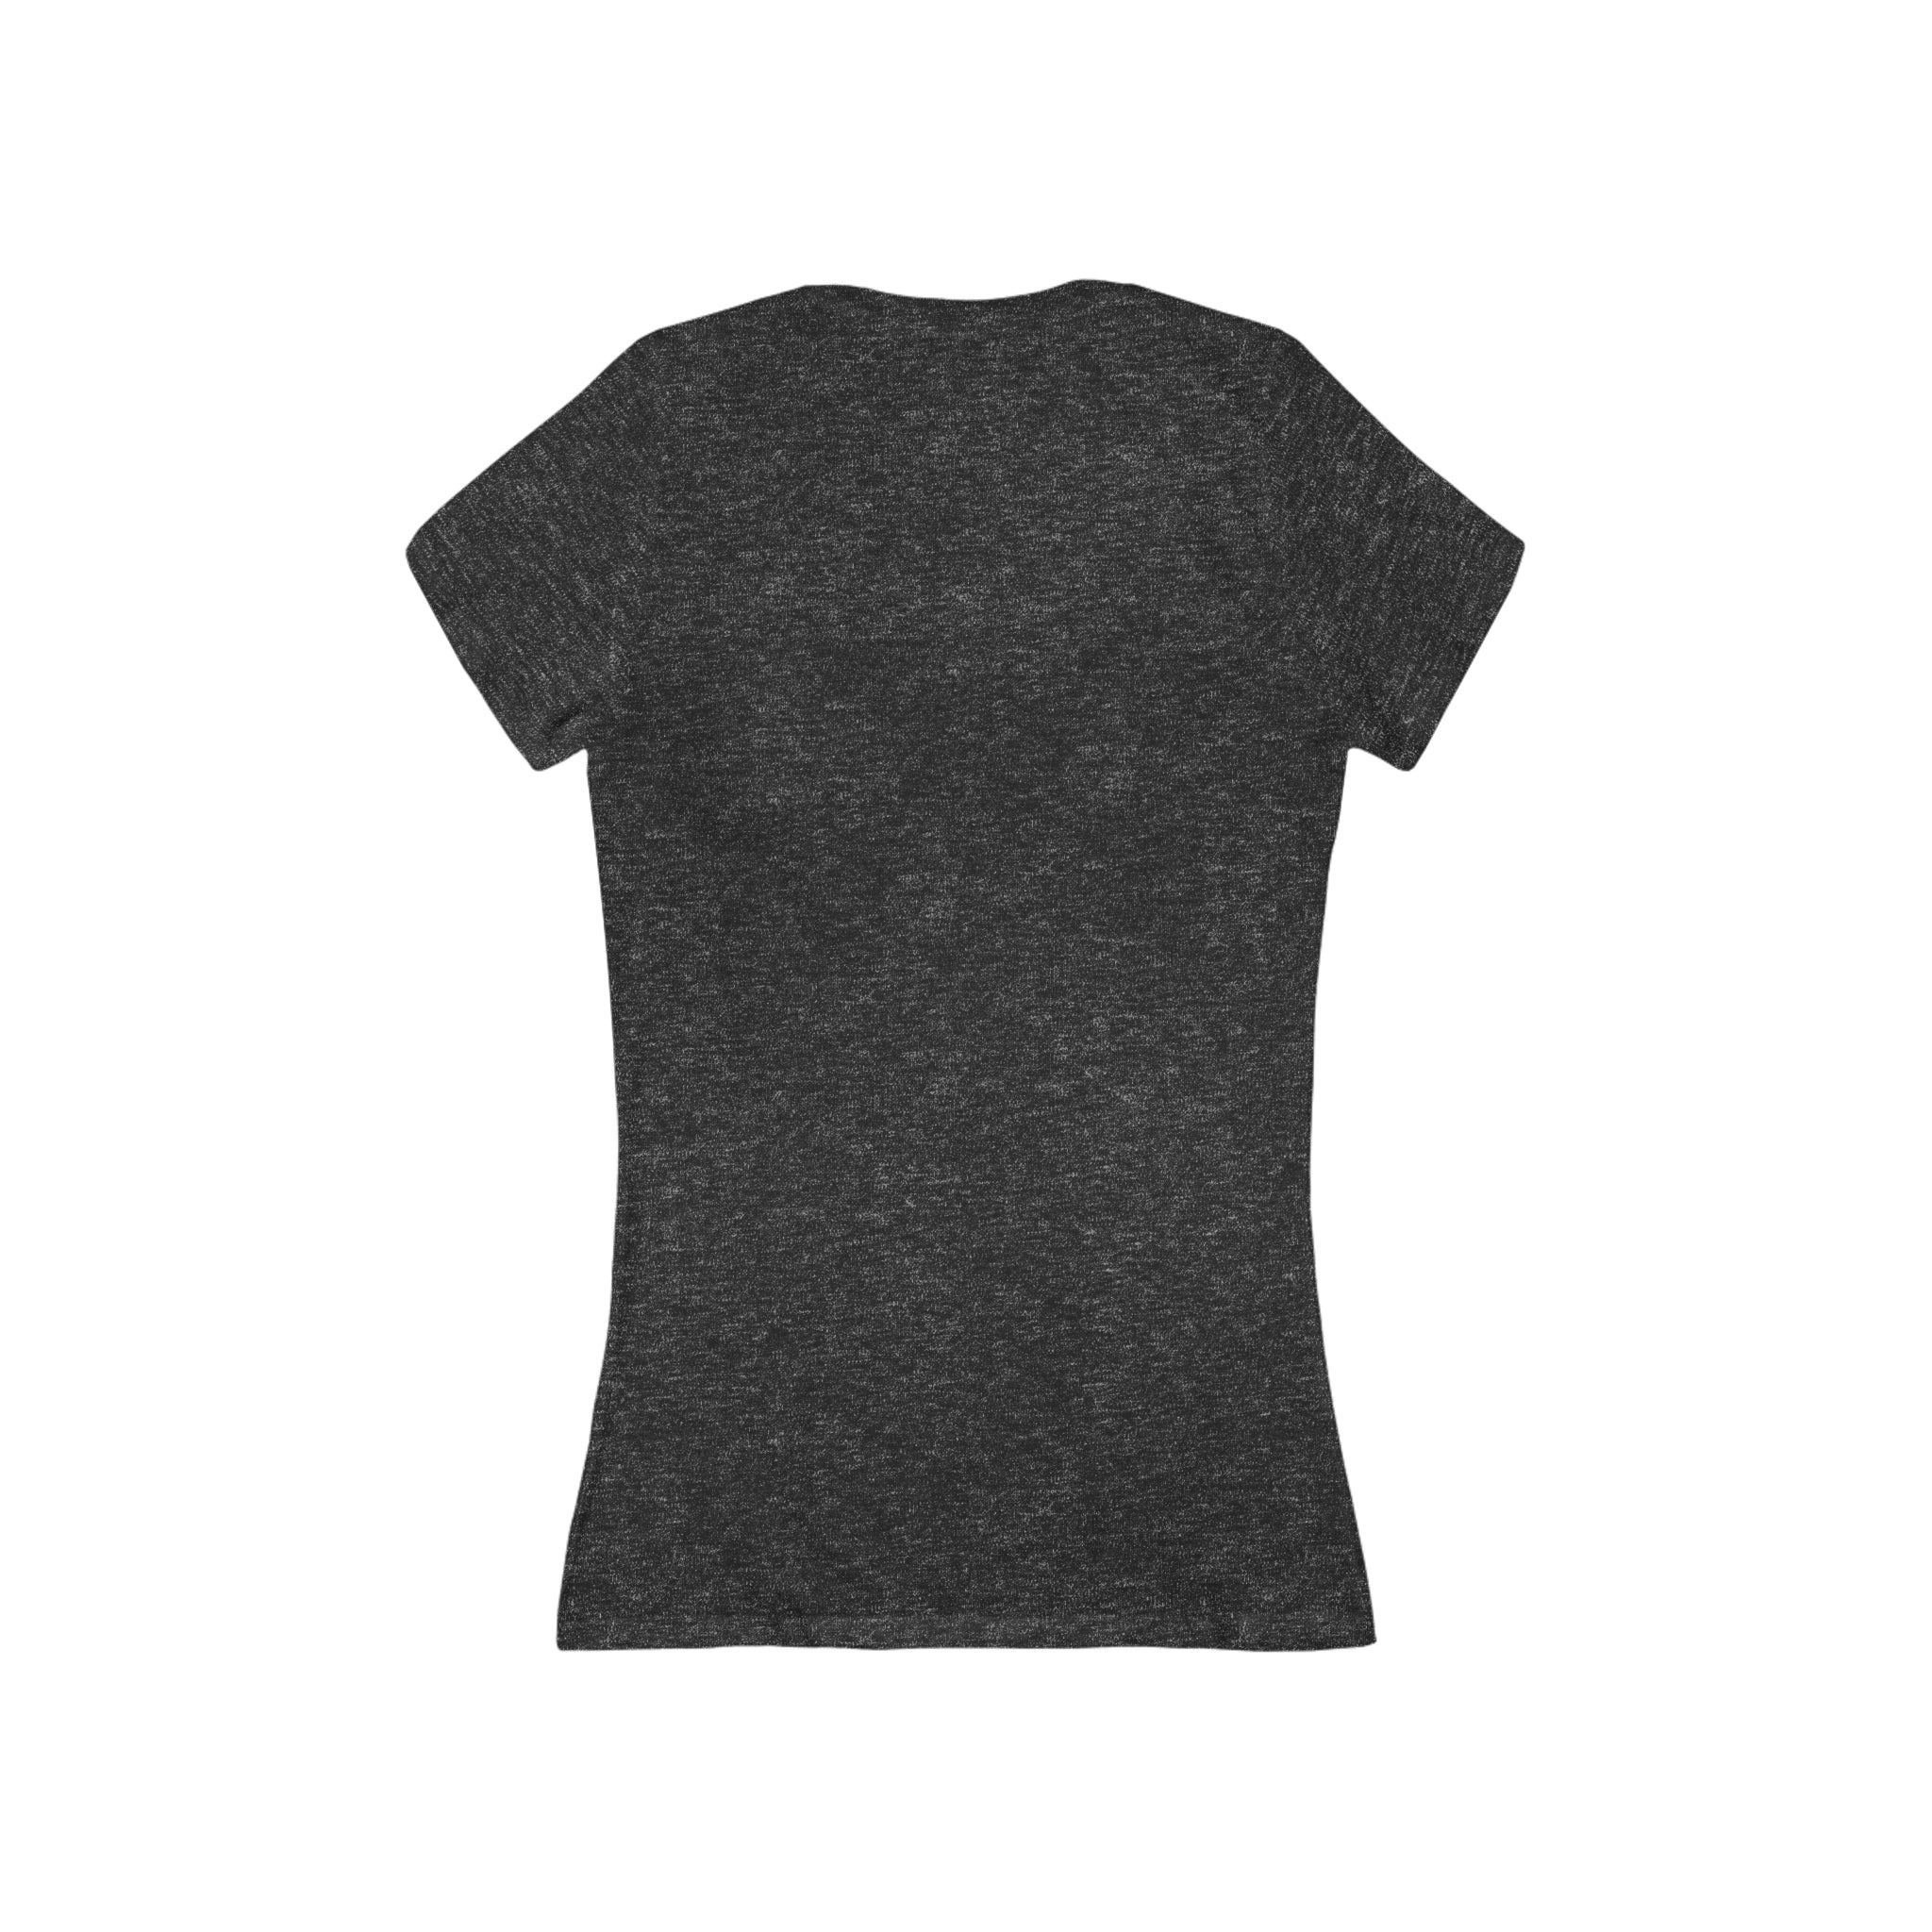 Collect Shoes & Socks Women's Deep V-Neck Tee